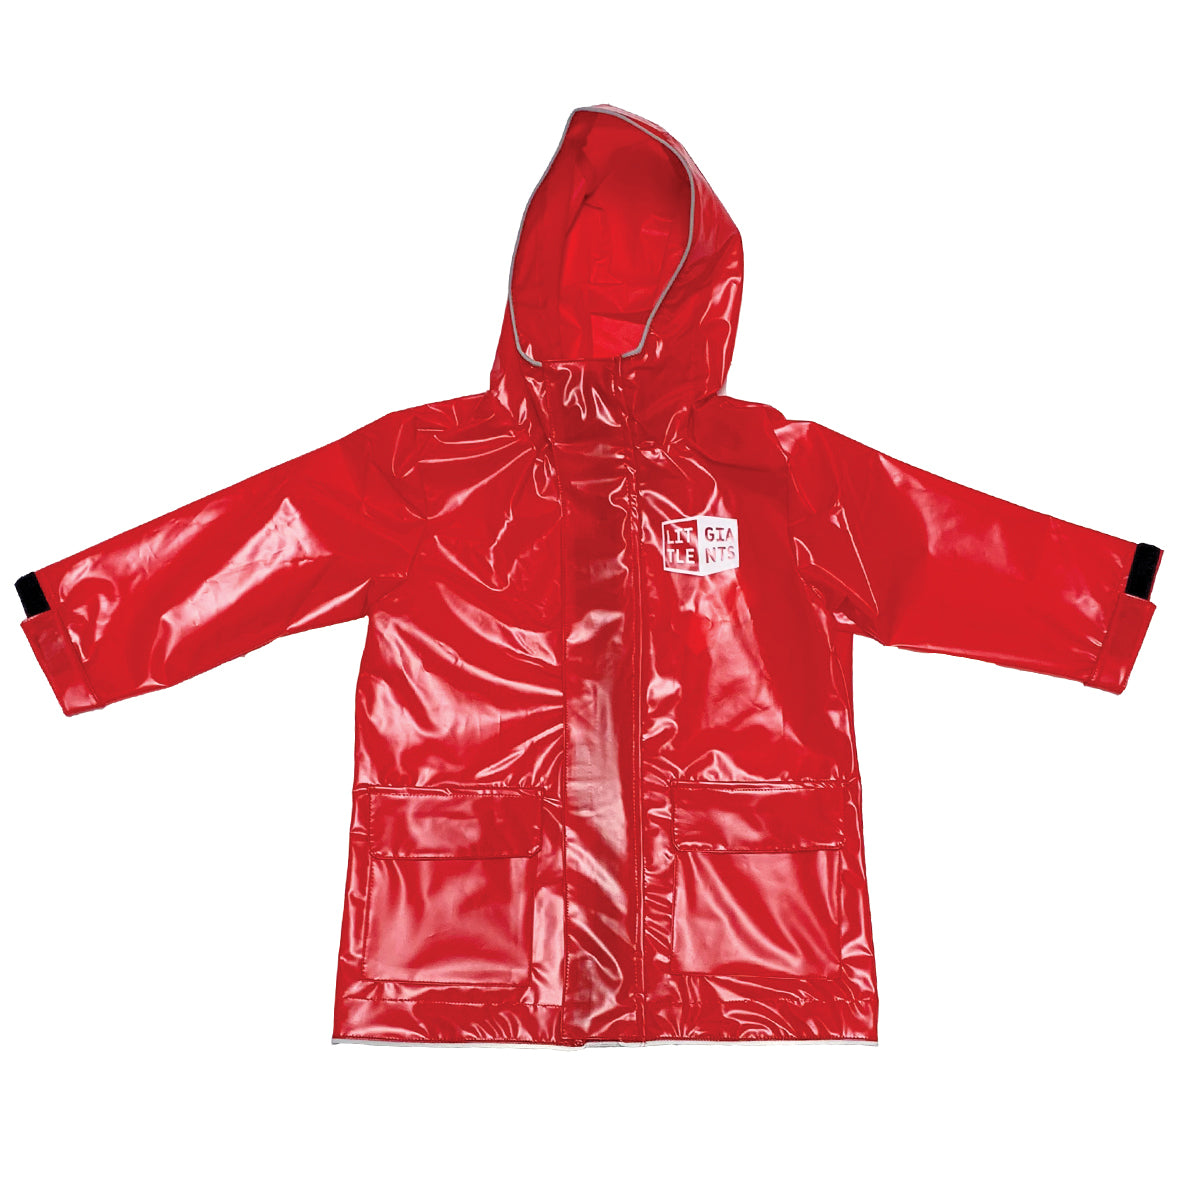 Can't Stand The Rain Jacket (Red)